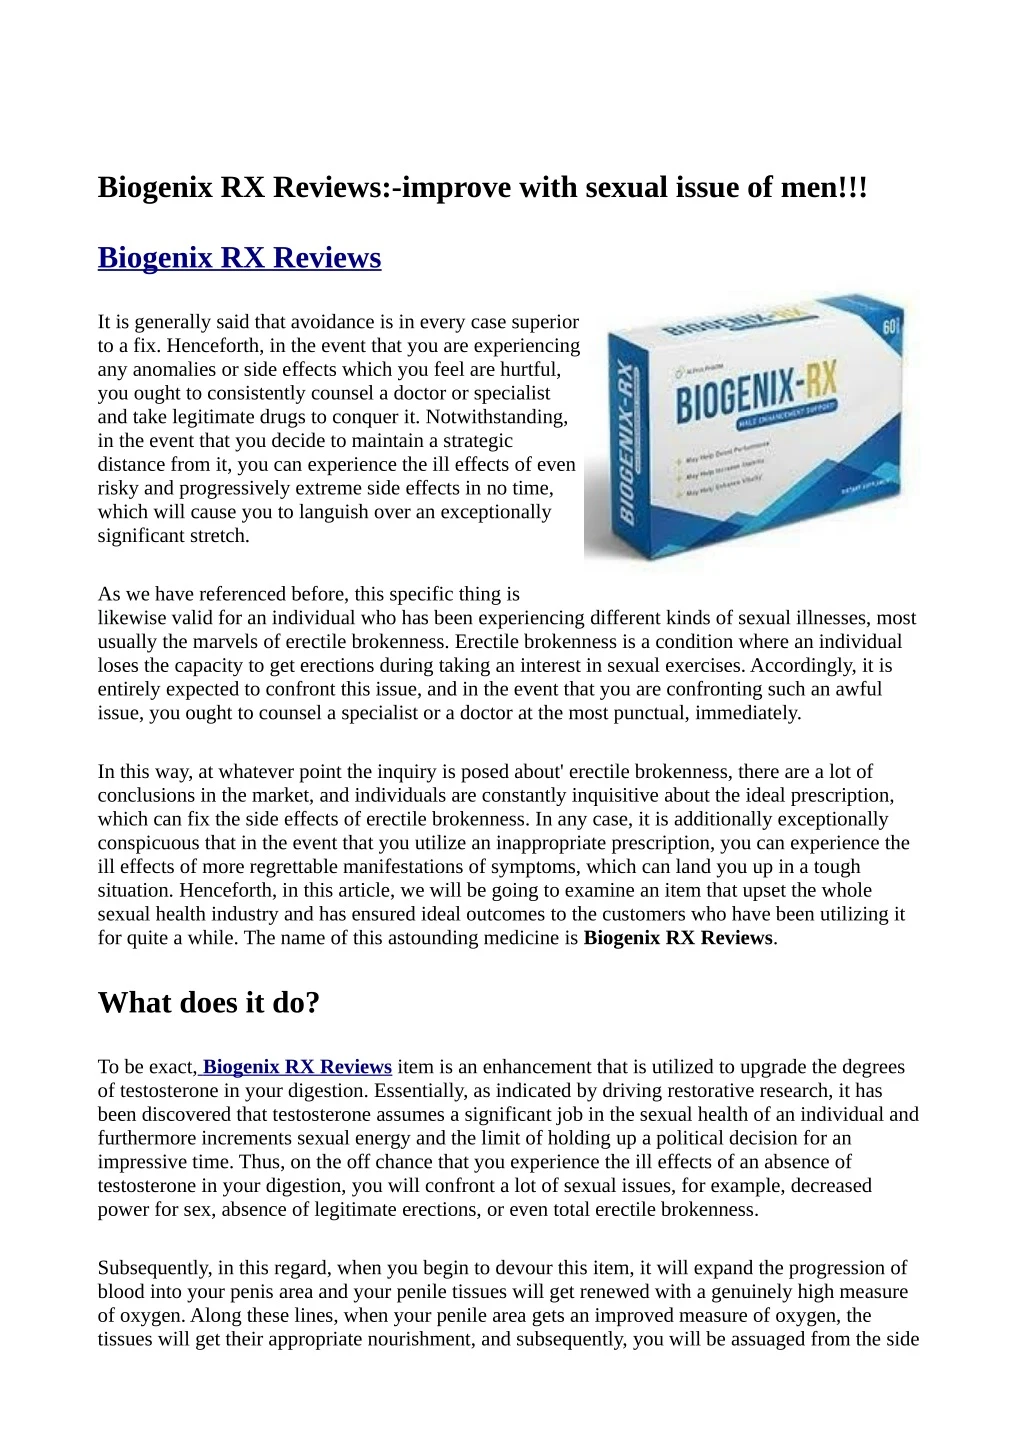 biogenix rx reviews improve with sexual issue